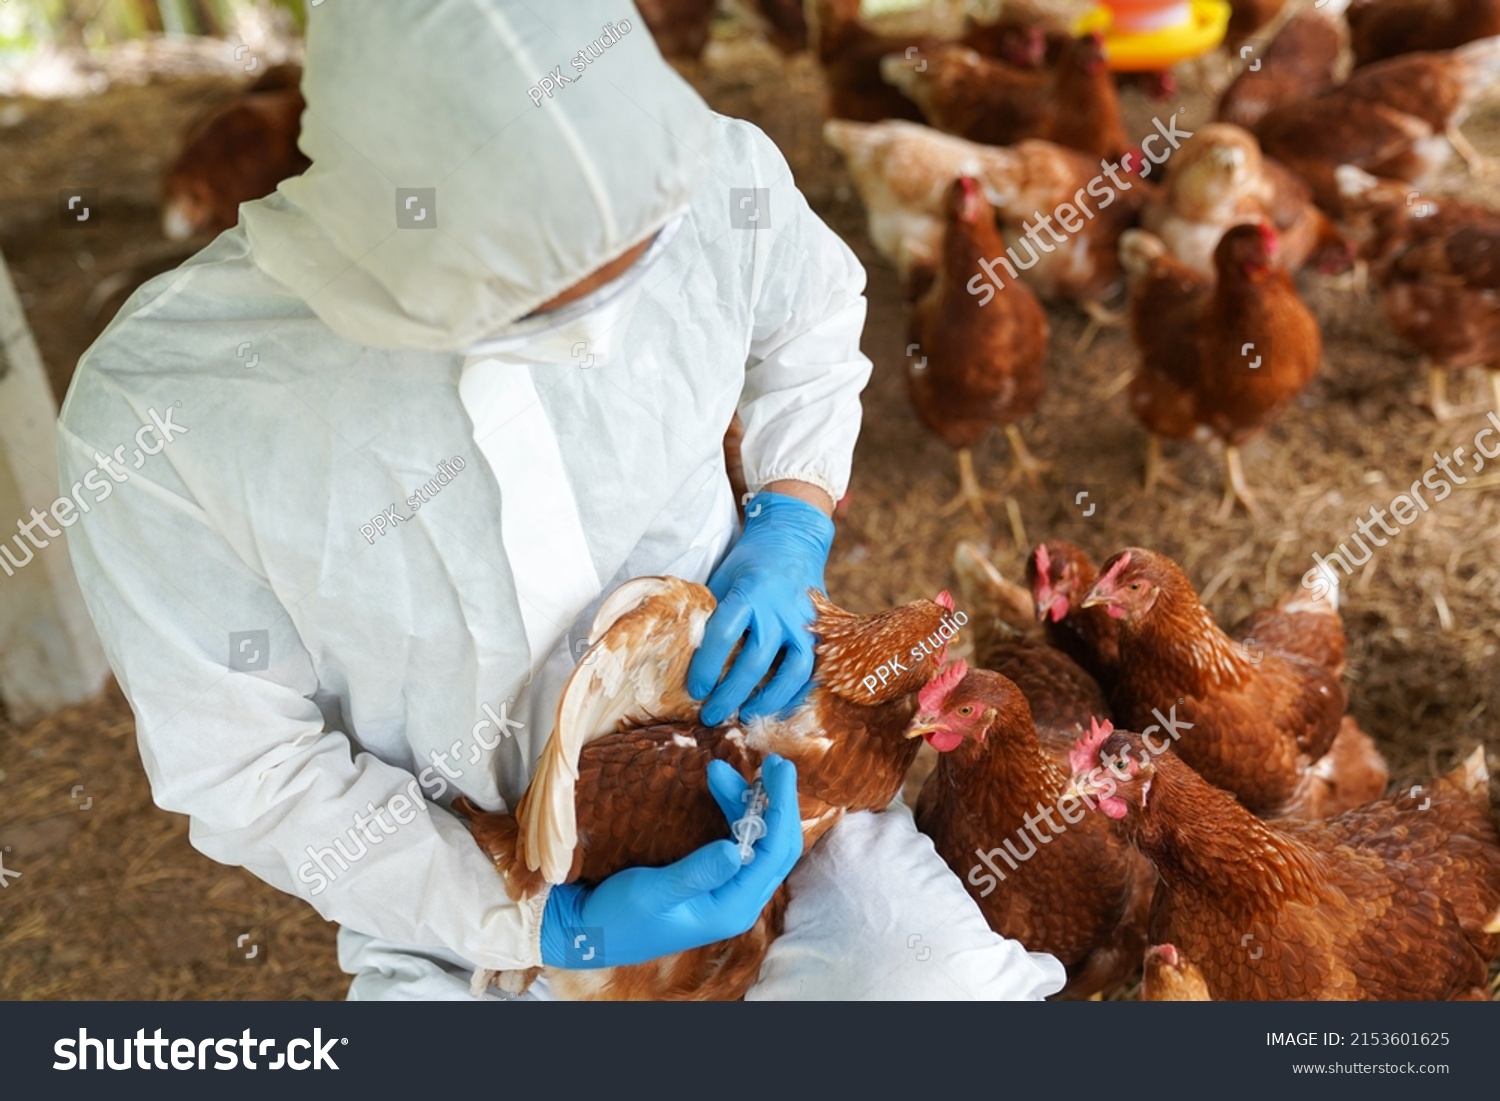 Veterinarians vaccinate against diseases in poultry such as farm chickens, H5N1 H5N6 Avian Influenza (HPAI), which causes severe symptoms and rapid death of infected poultry. #2153601625